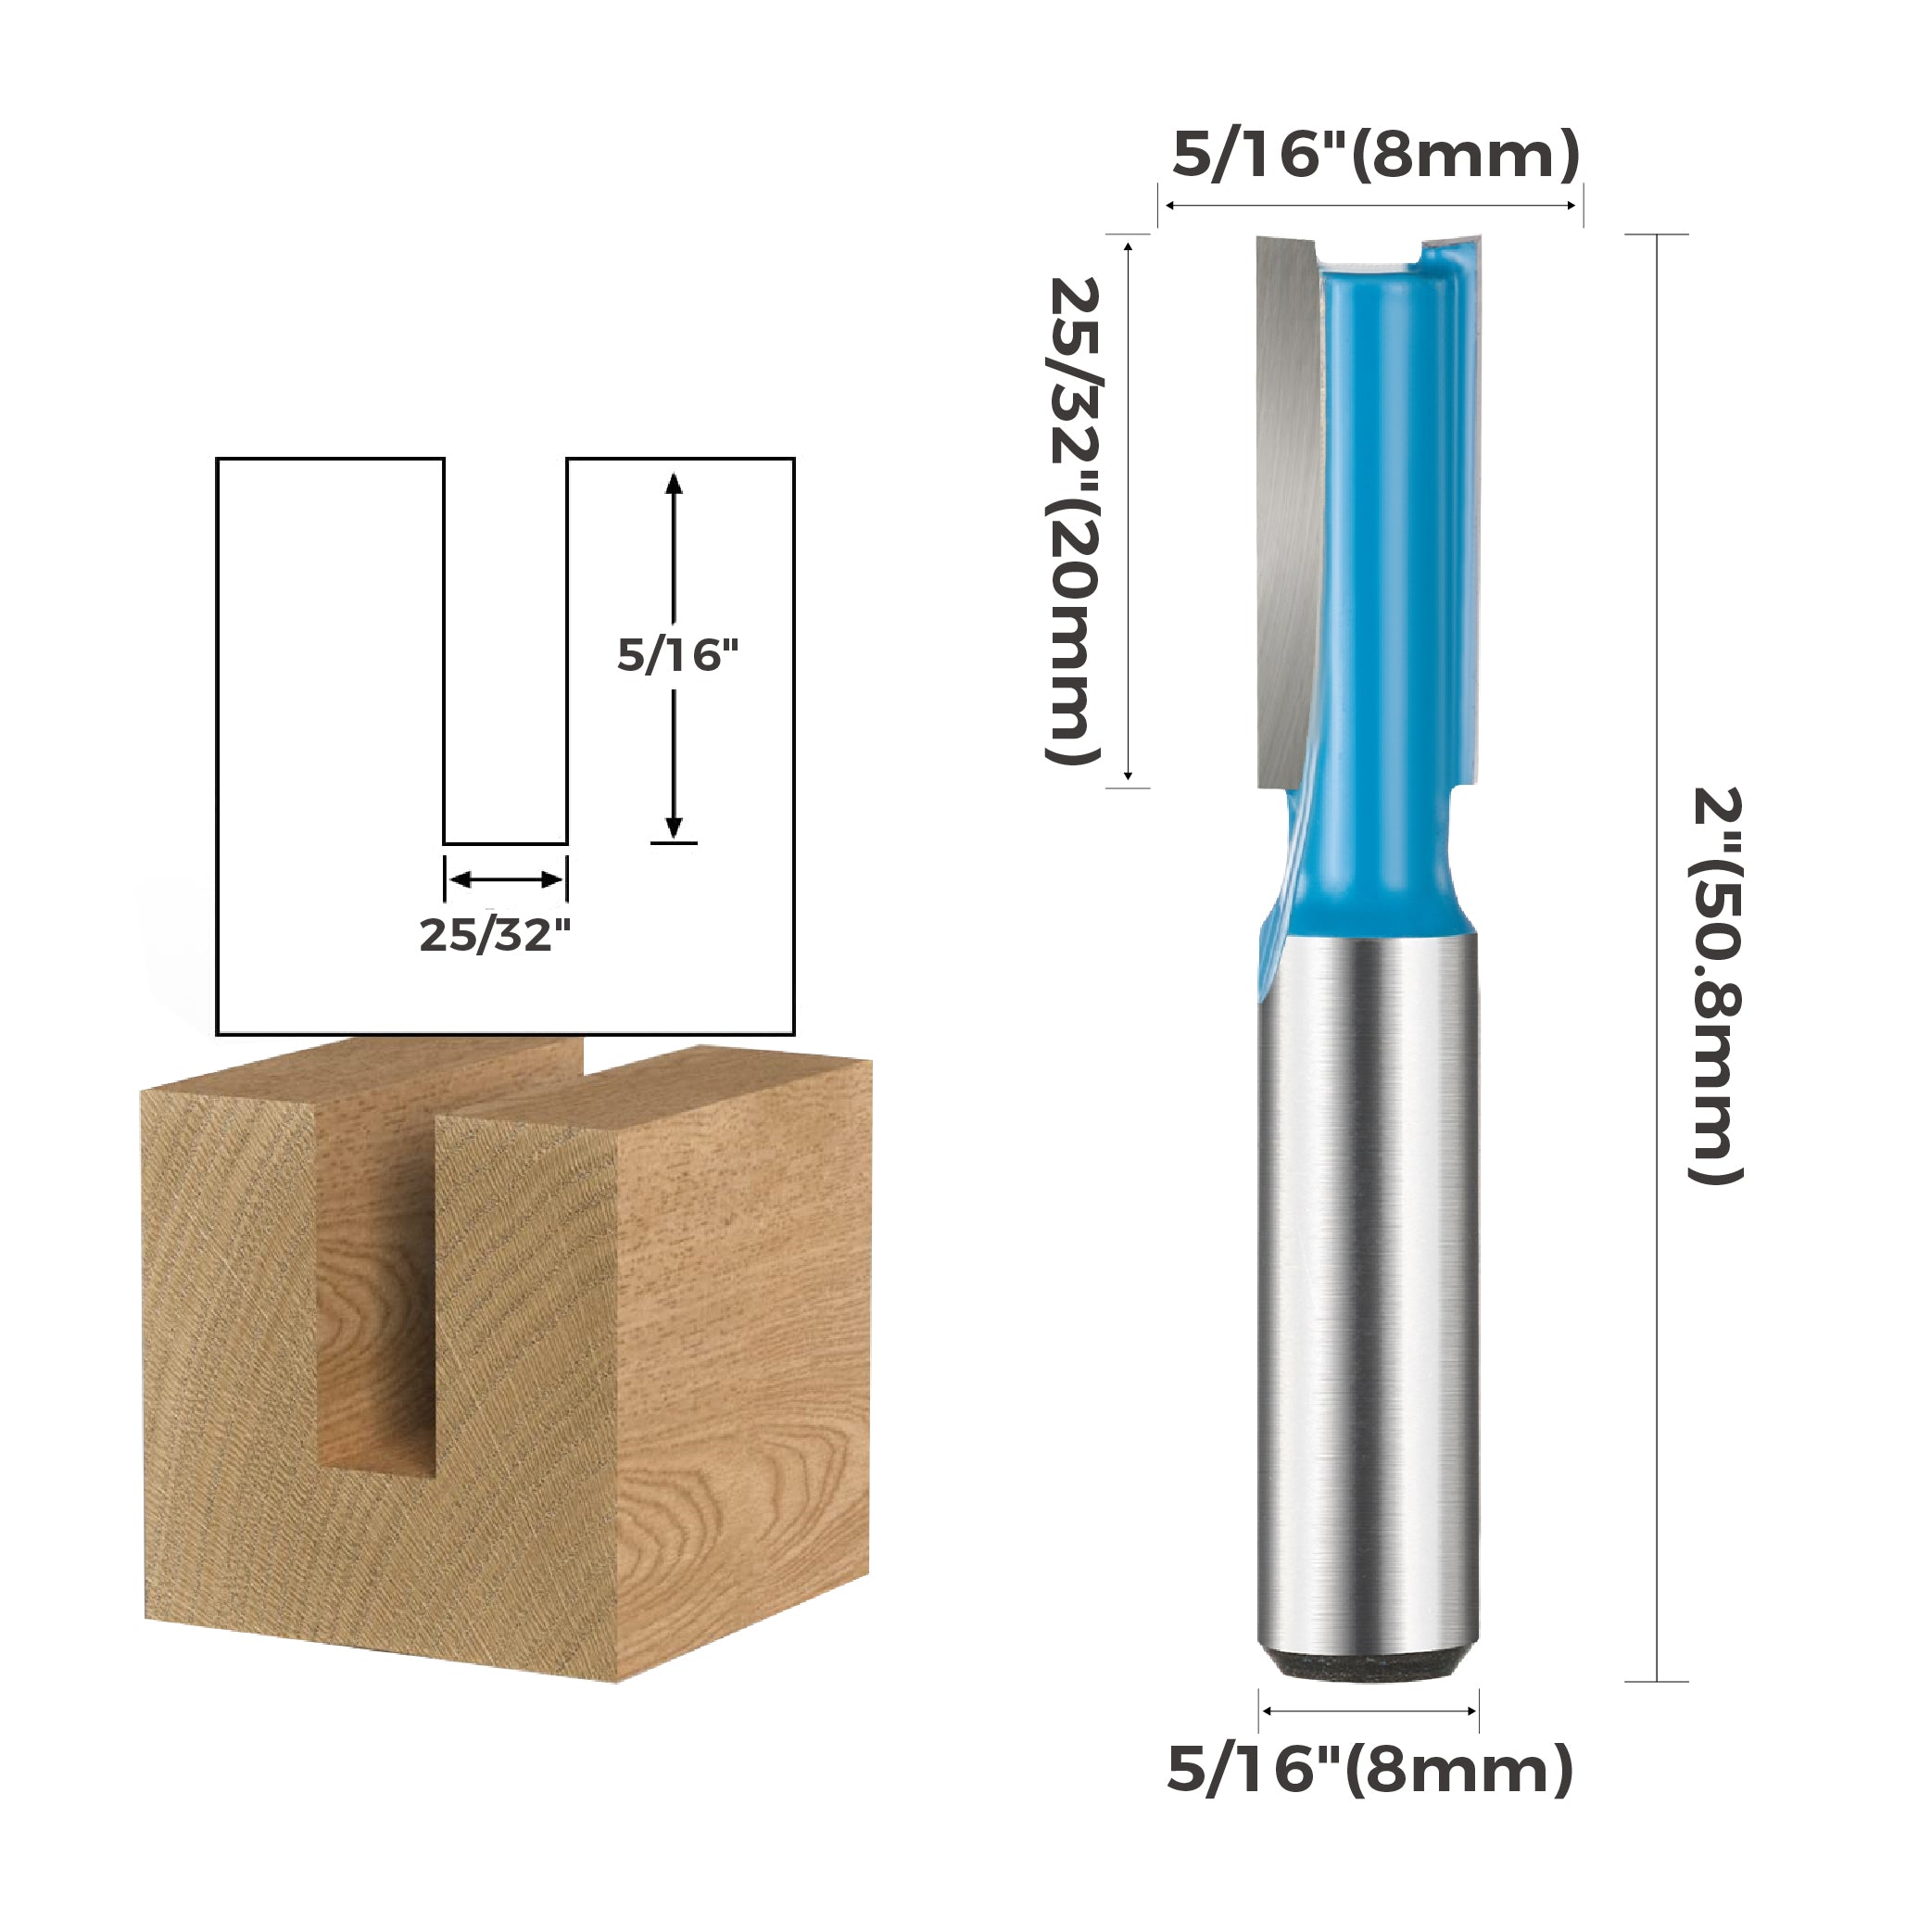 toolant Straight Router Bits , 5/16-Inch Shank 25/32-Inch Height X 5/16-Inch Dia, Carbide-Tipped Milling Cutter for Woodworking